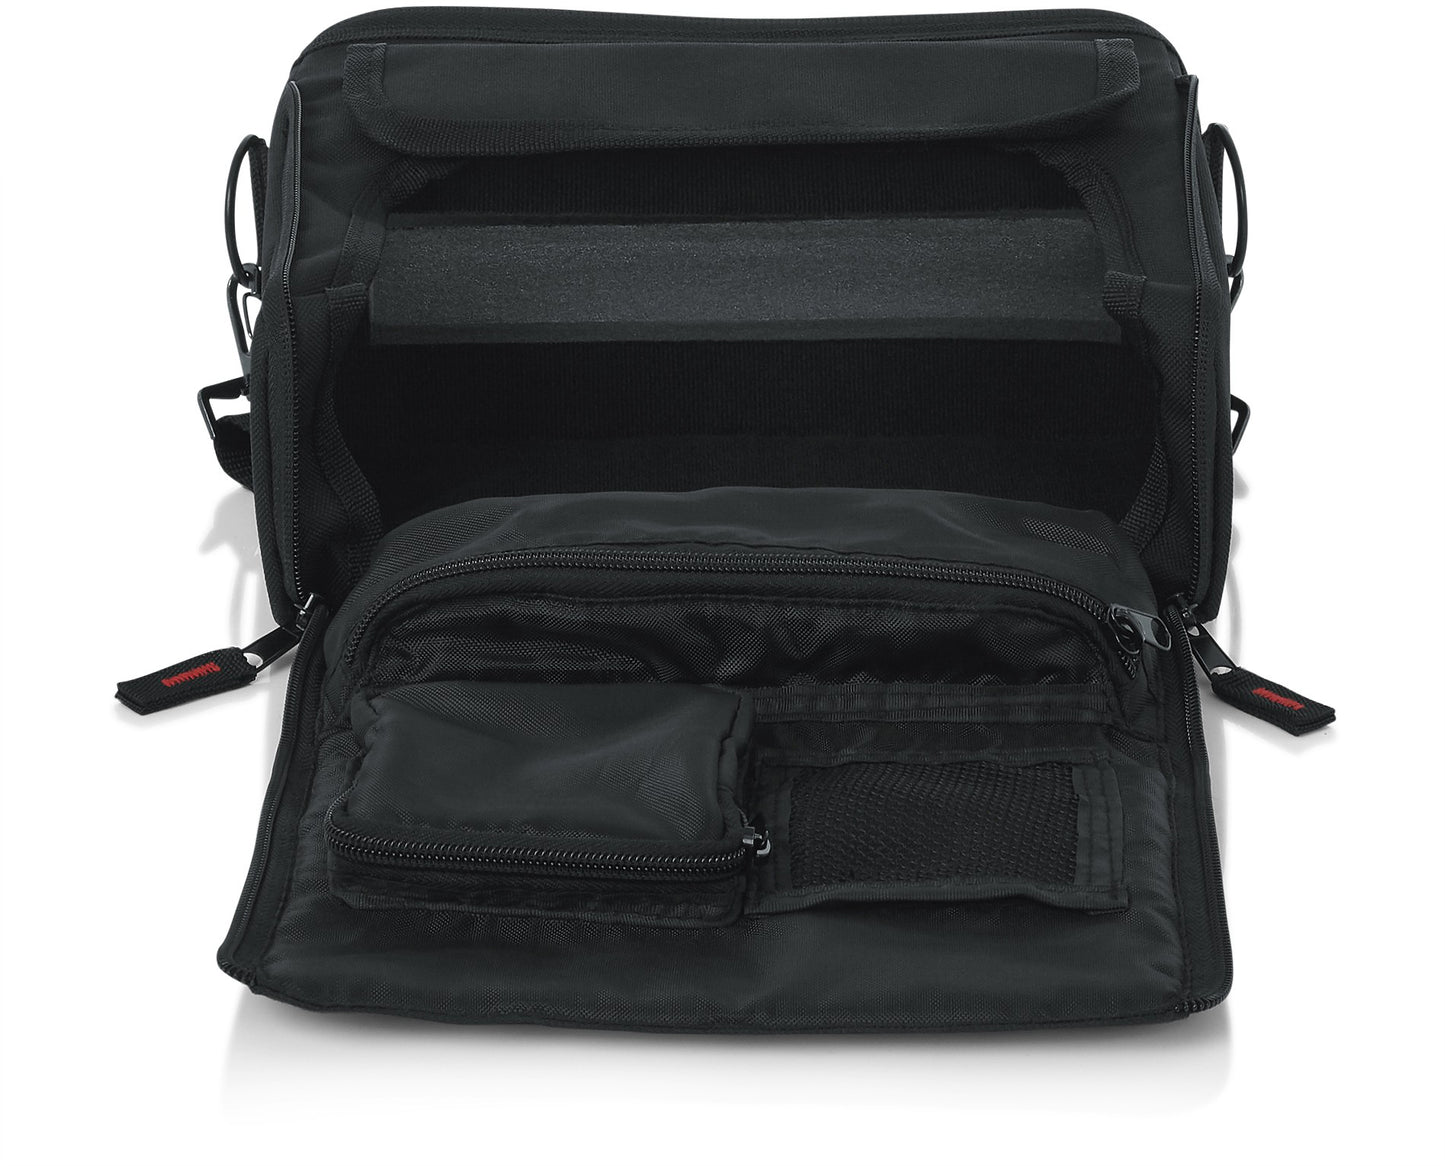 Gator G-IN EAR SYSTEM Bag for In-Ear Monitoring System